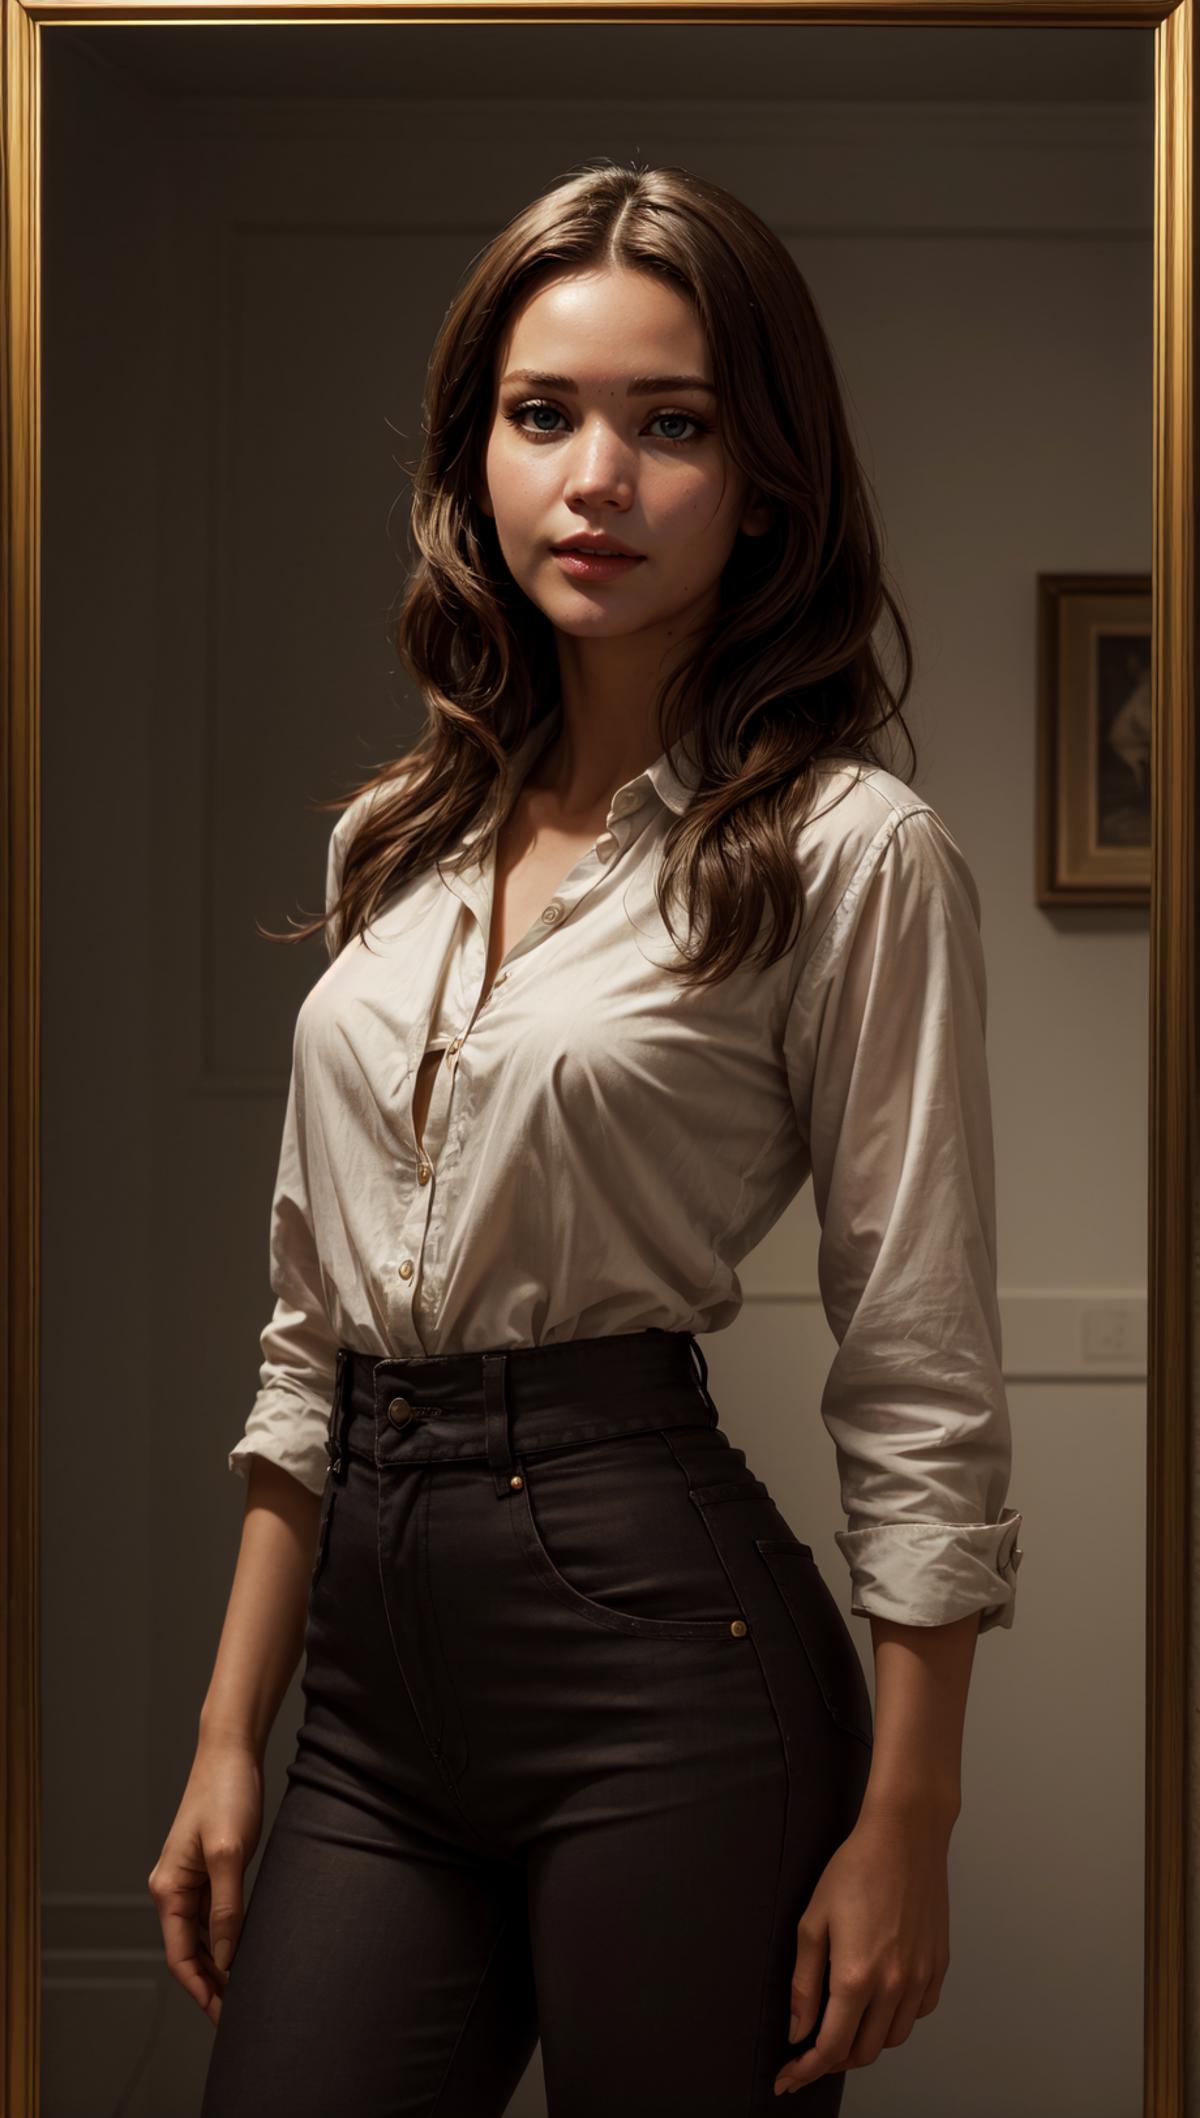 A woman wearing a white shirt and brown pants stands in front of a mirror.